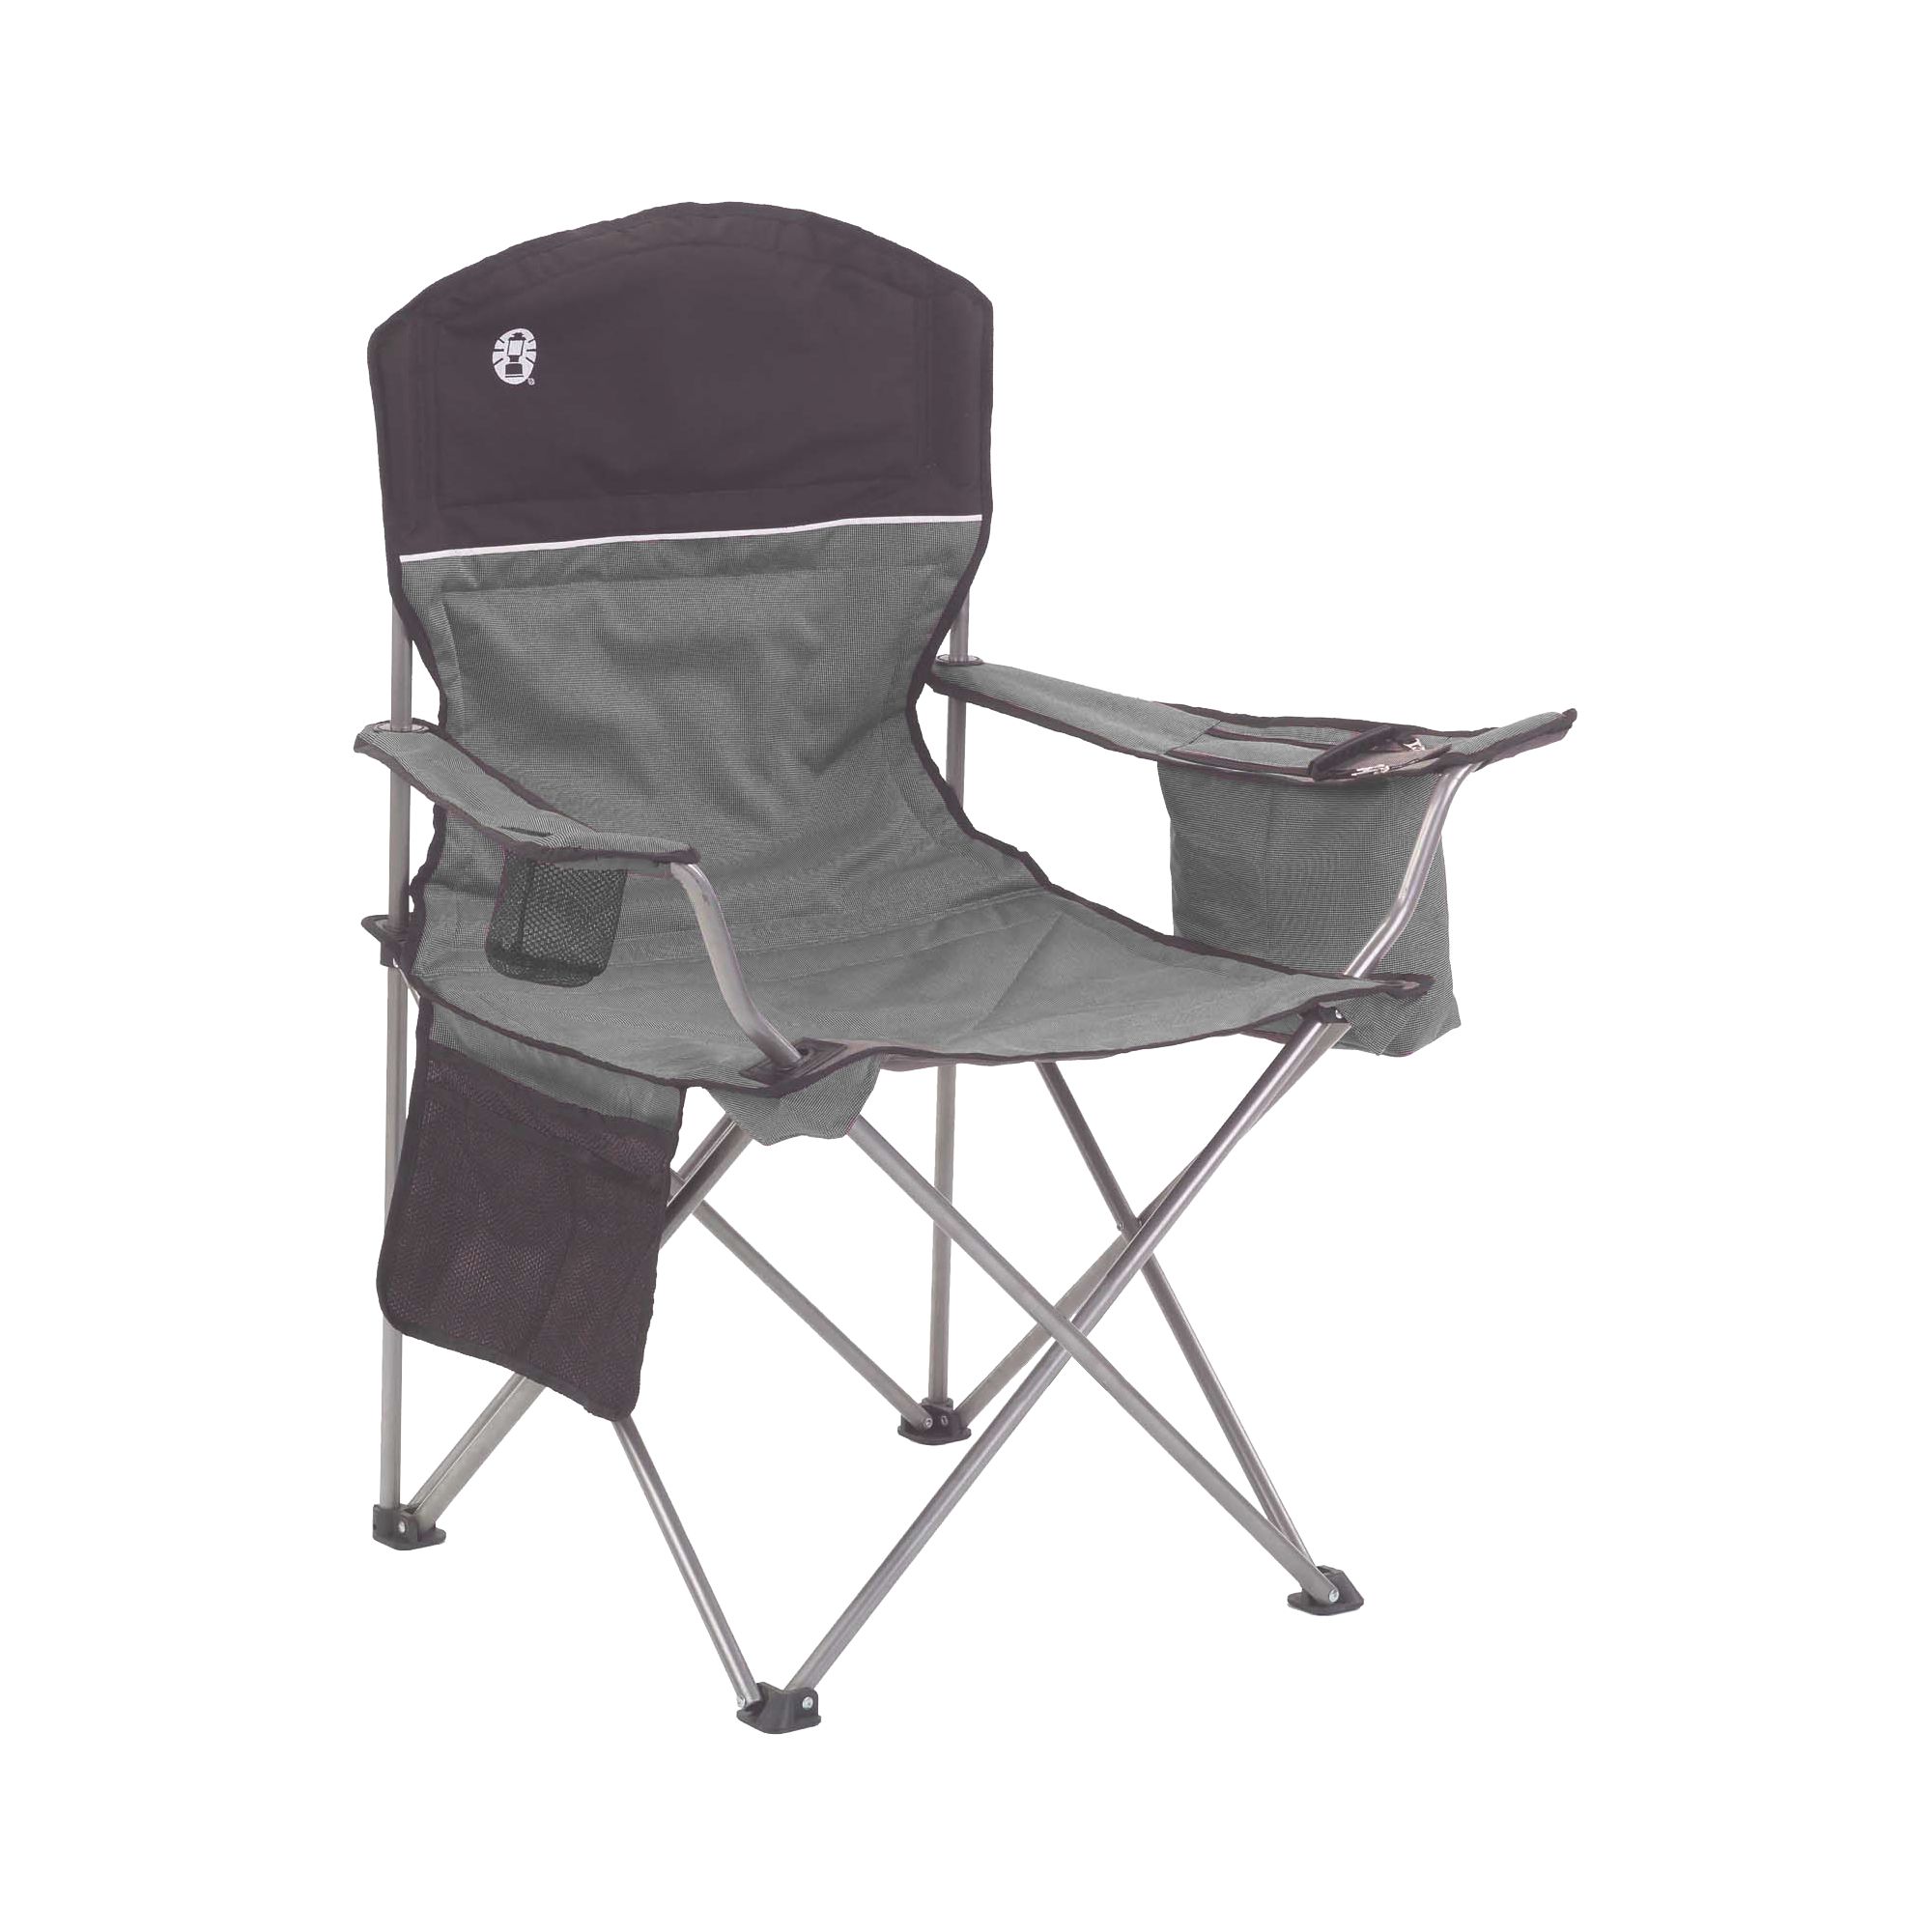 coleman oversized quad chair with cooler